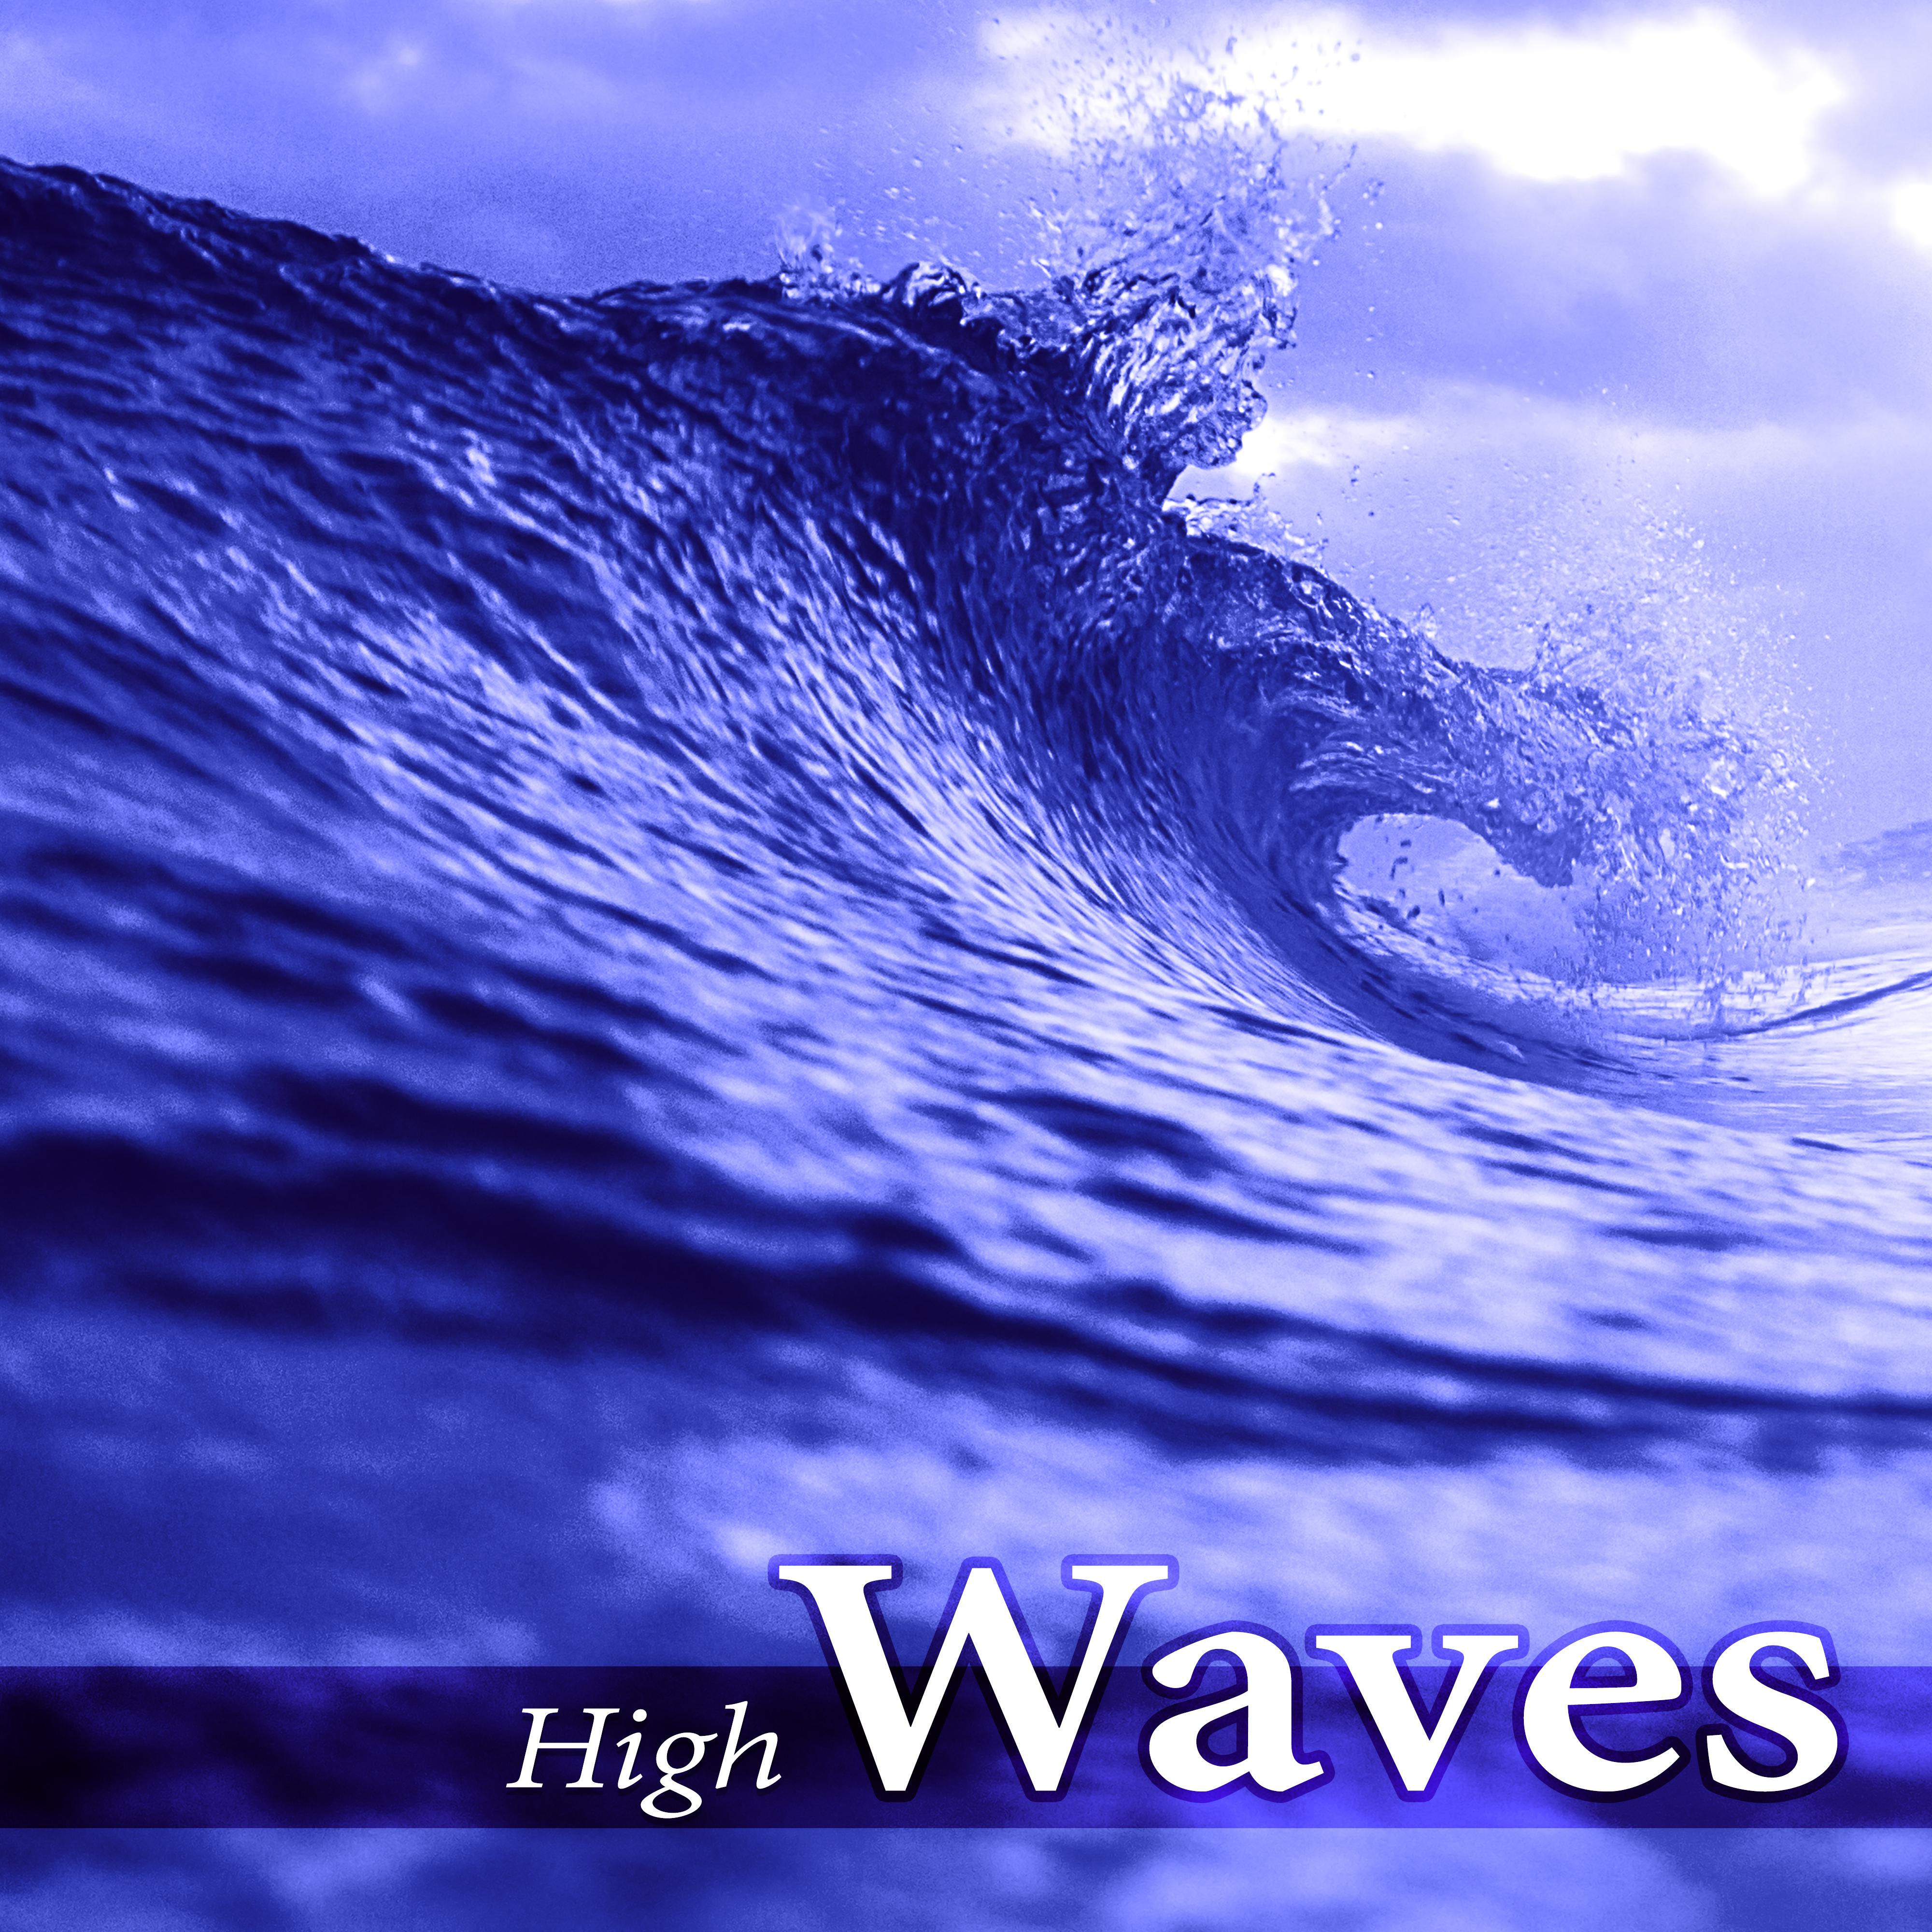 High Waves - Calm Music for Reiki, Yoga Positions and Breathing Exercises, Natural Sounds for Pilates and Wellness